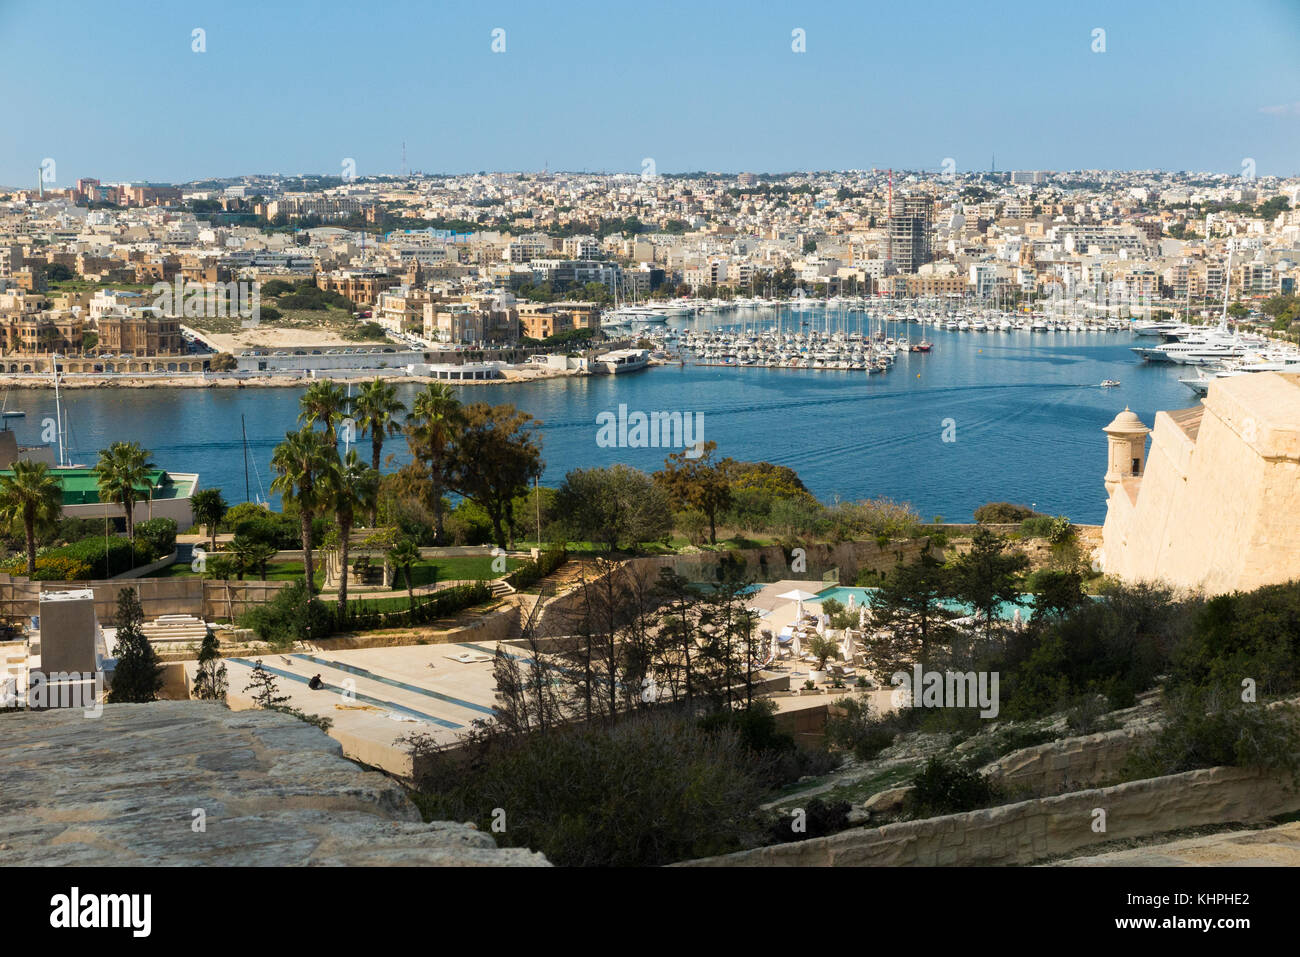 Looking over Marsamxett Harbour to Ta' Xbiex in the distance on the left, and Manoel Island and Manoel Marina on the right, from Valletta, Malta. (9 Stock Photo